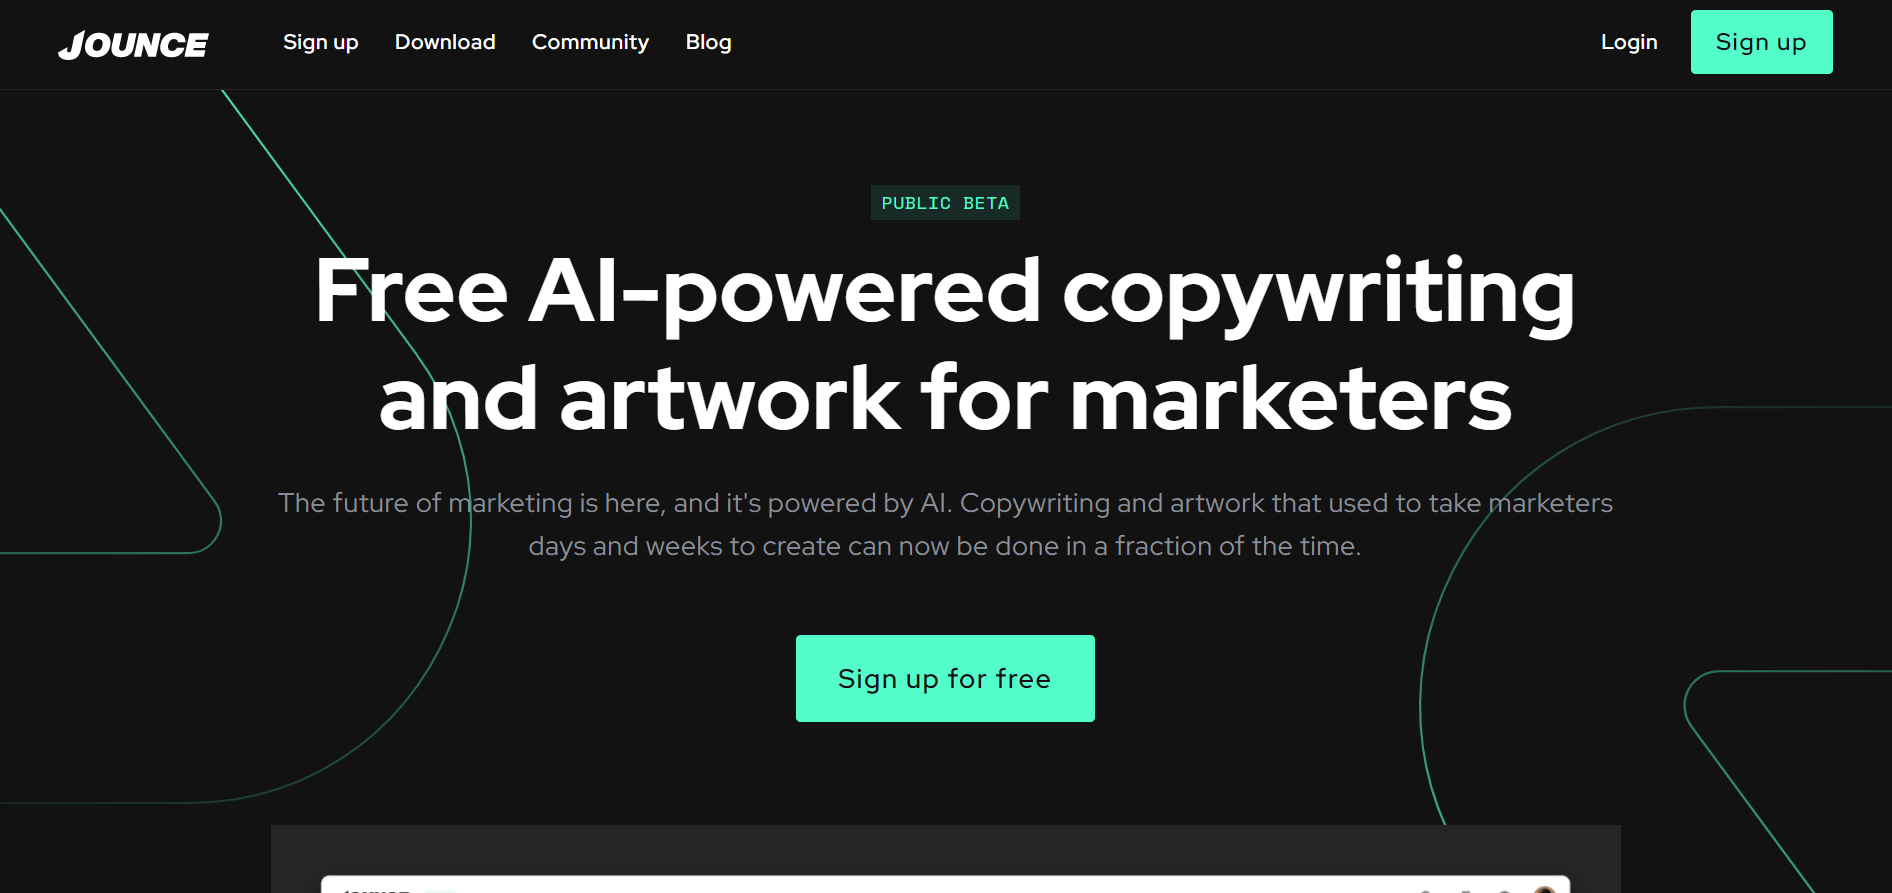 Transform Your Marketing with Jounce.ai ‘s AI-Powered Copywriting Solutions!